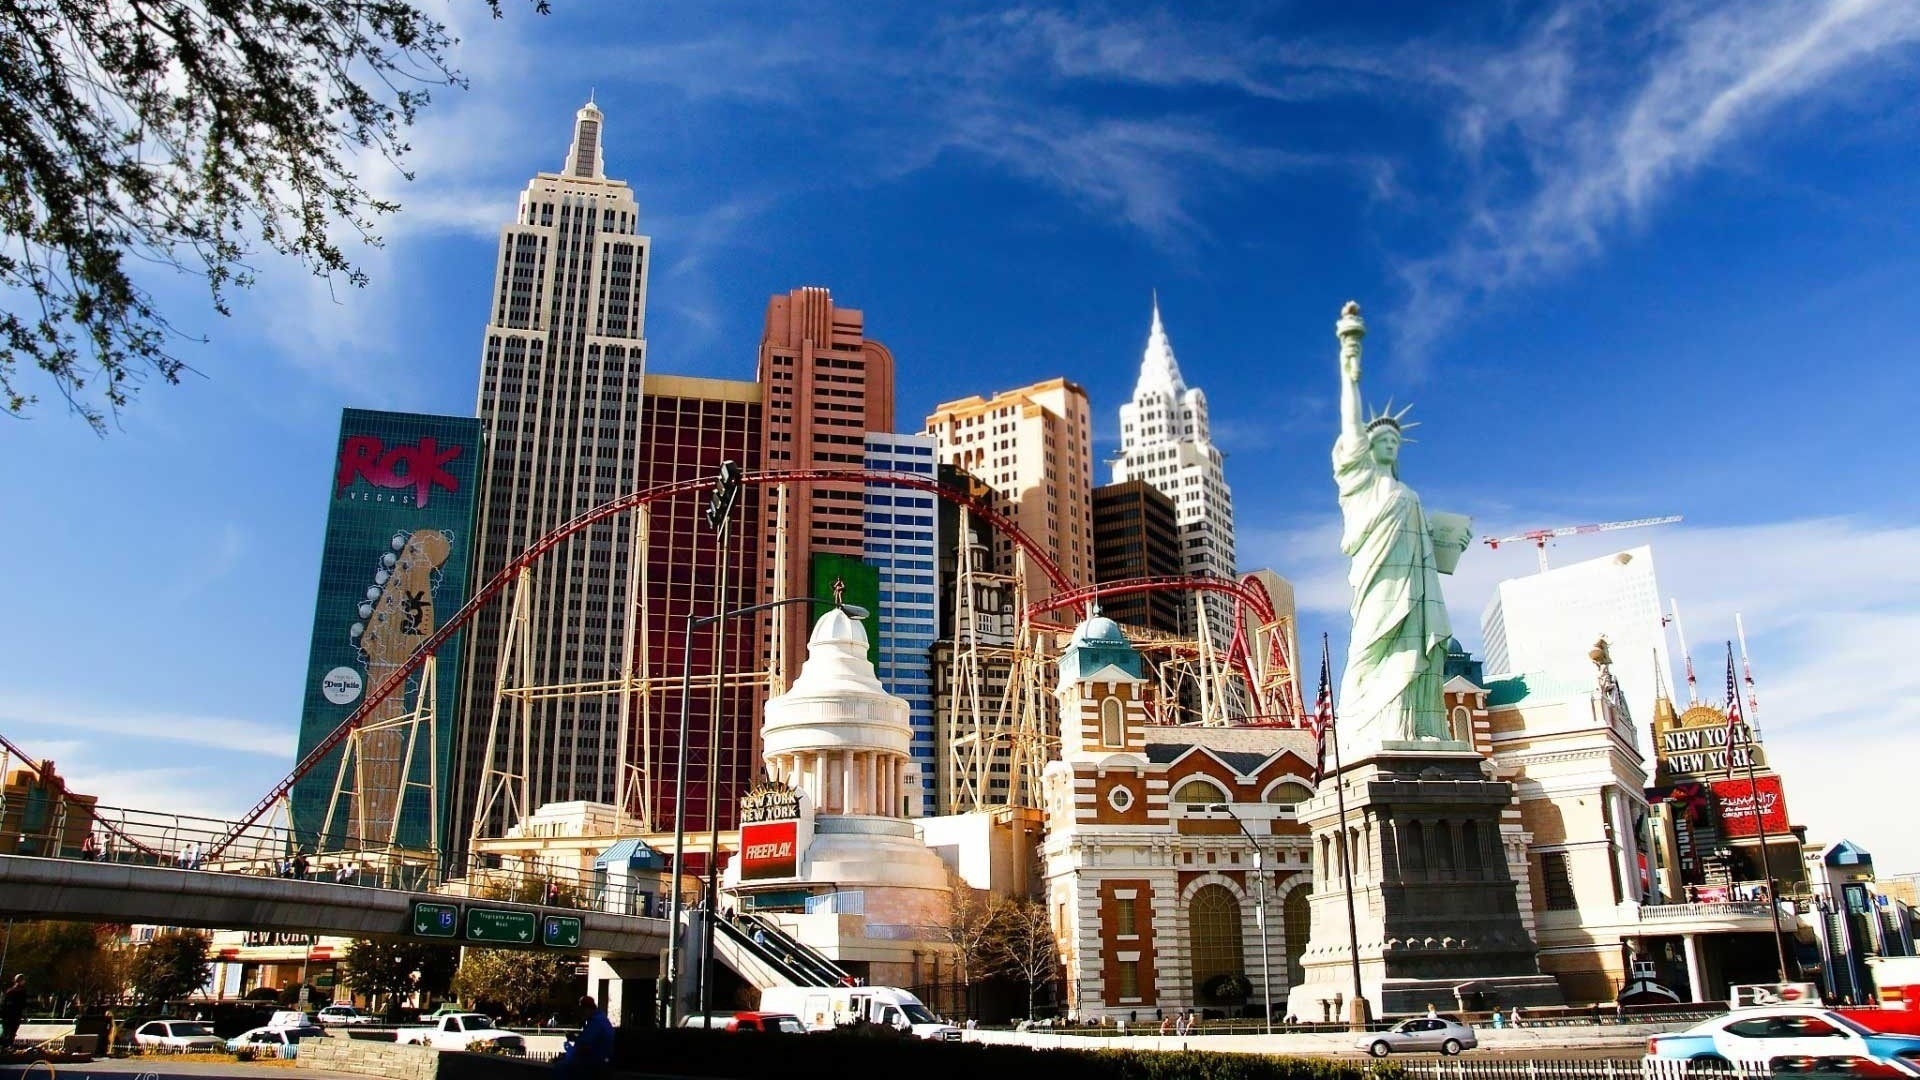 Las Vegas New York Statue Wallpaper Hd City 4k Wallpapers Images Photos And Background Wallpapers Den